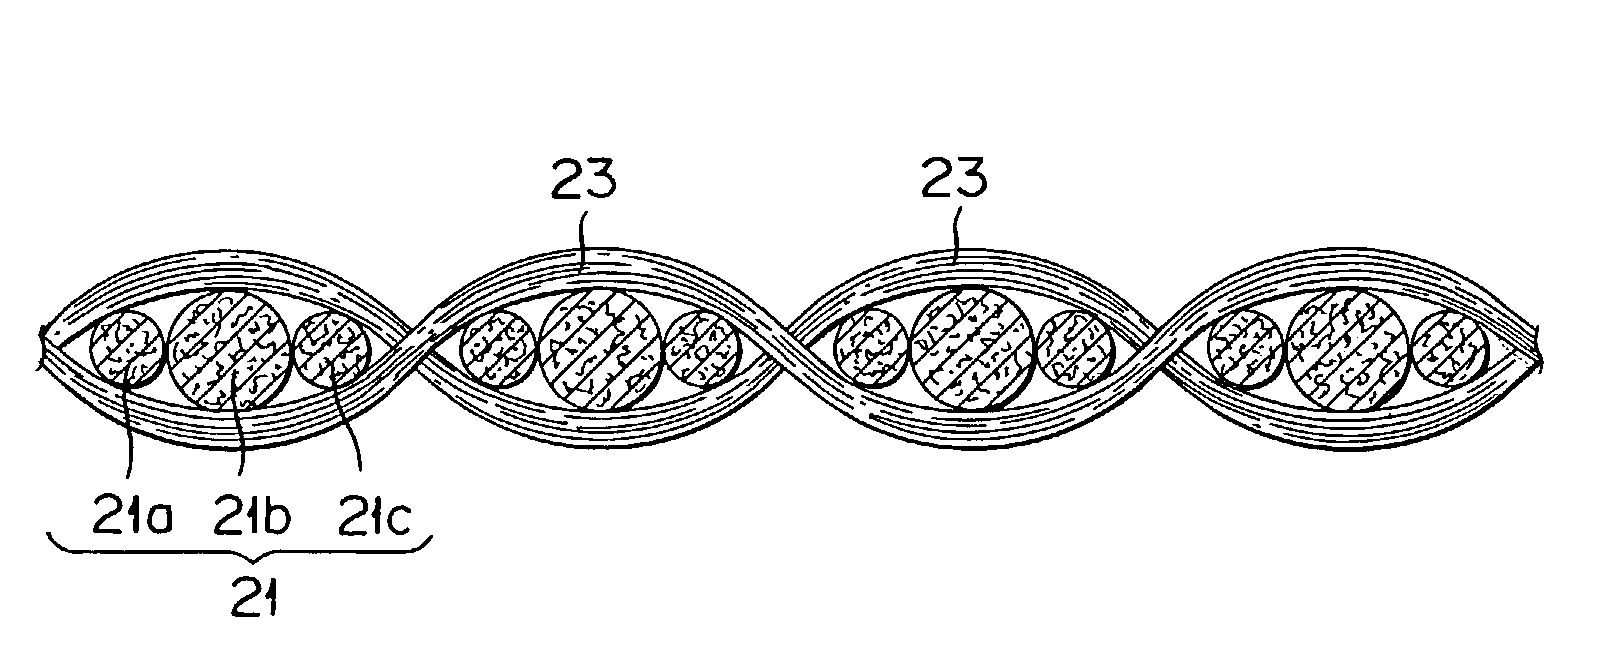 Woven tubing for stent type blood vascular prosthesis and stent type blood vascular prosthesis using the tubing